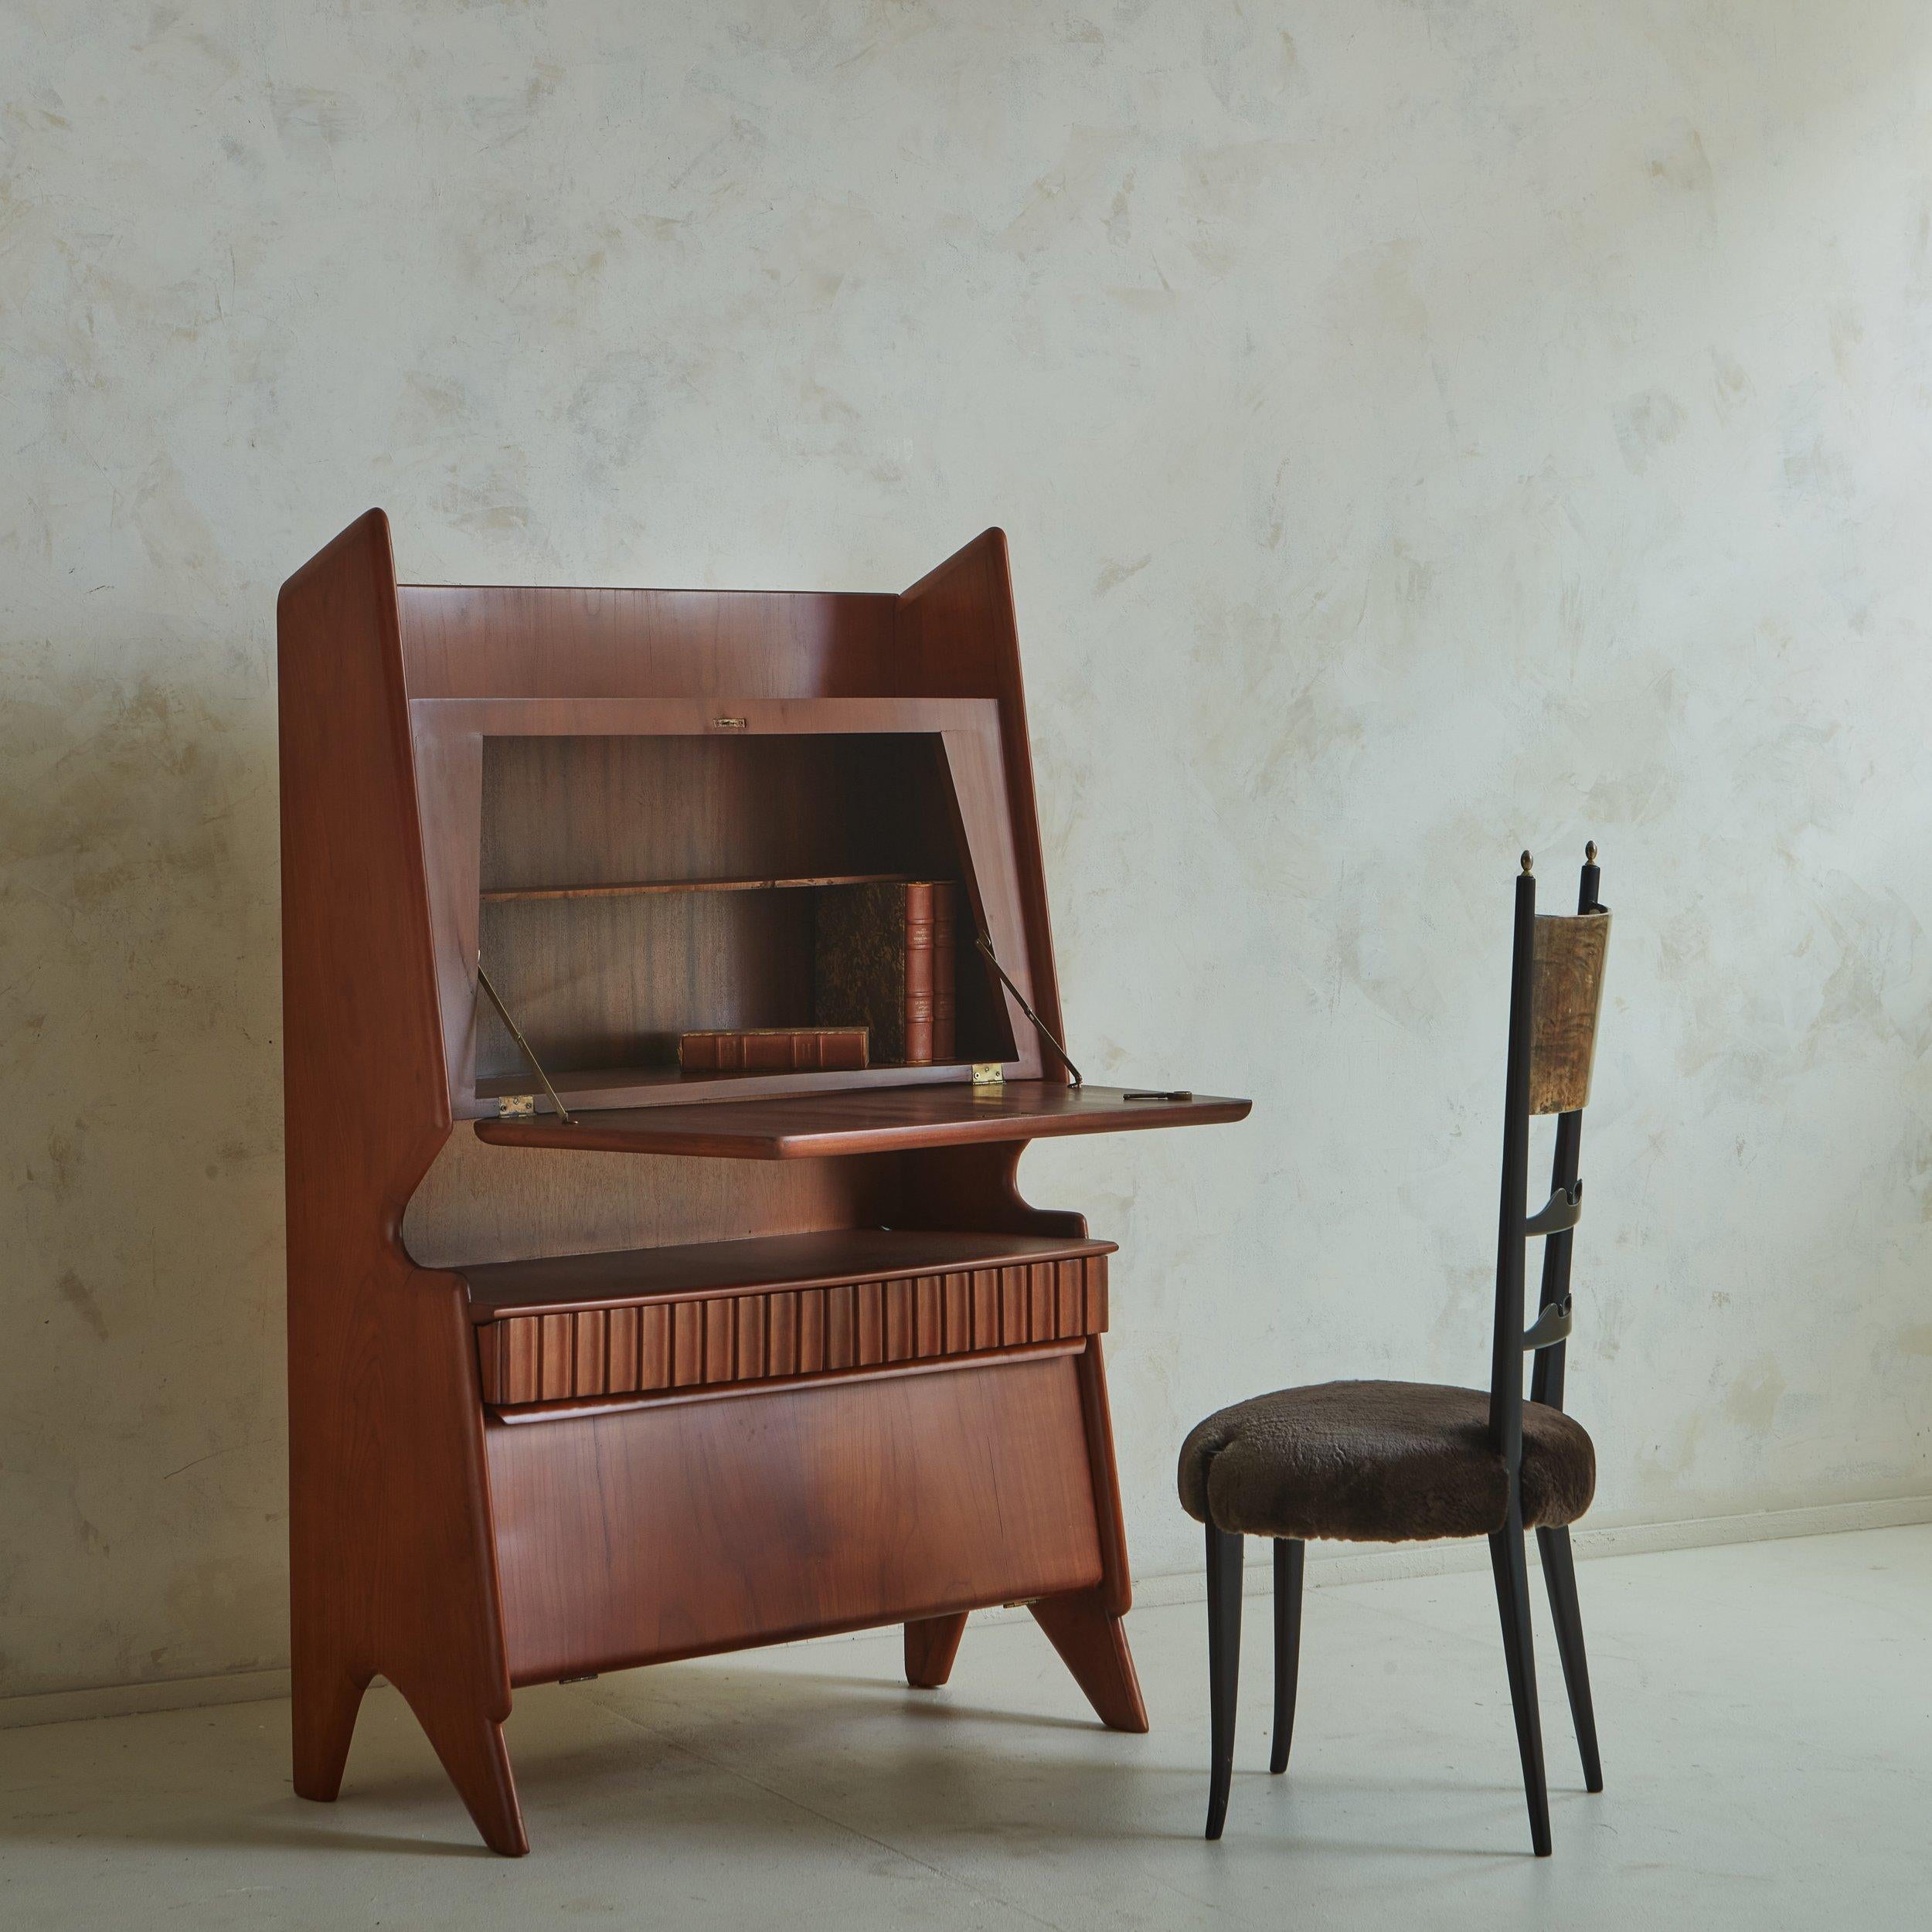 A stunning 1950s Italian secretary desk constructed with birch and walnut. This piece features a sculptural profile with a channeled trim detail and angled, tapered legs. A uniquely shaped drop front writing surface opens with a key to reveal one